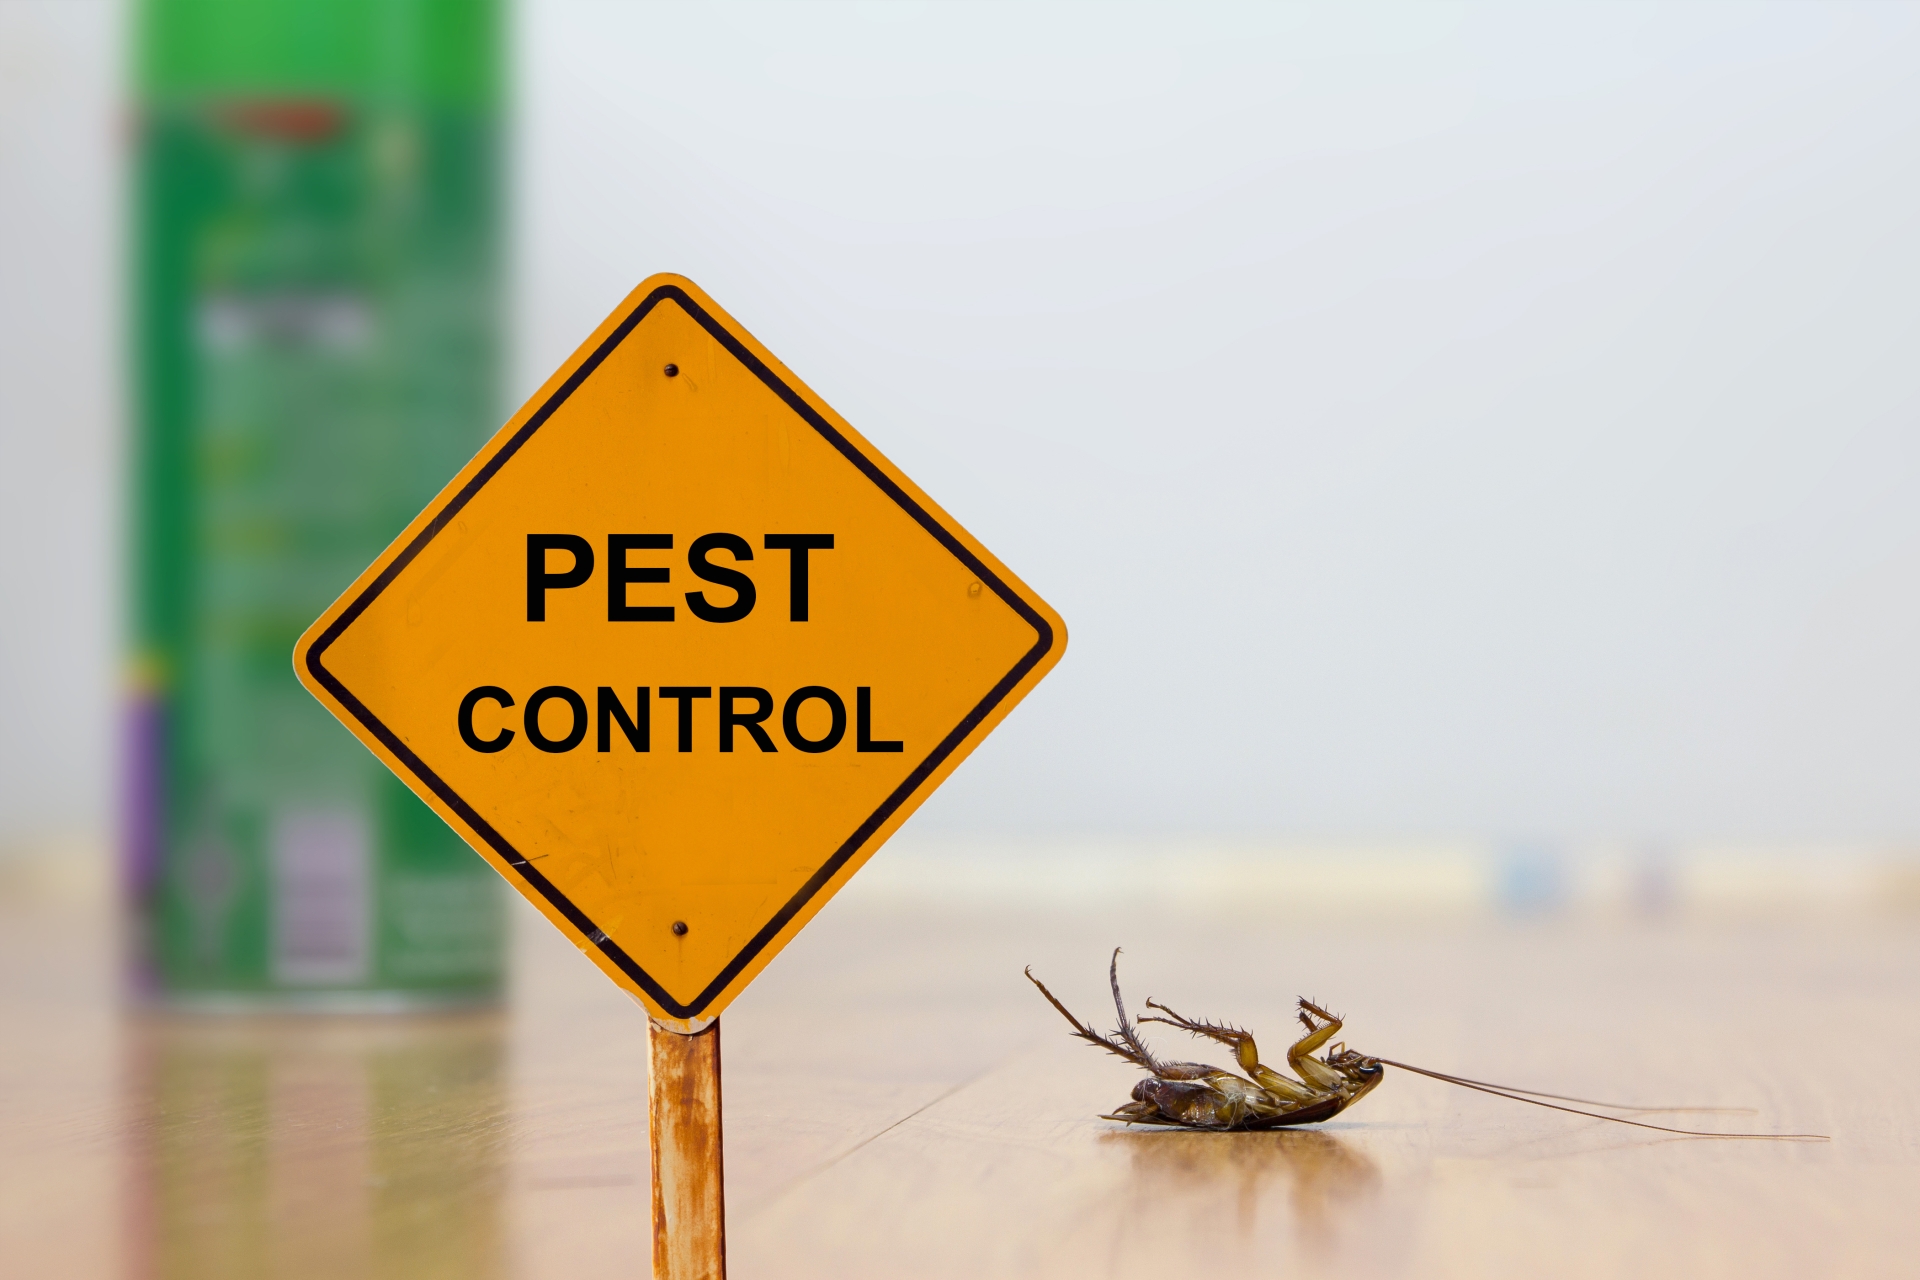 24 Hour Pest Control, Pest Control in Clerkenwell, Finsbury, Barbican, EC1. Call Now 020 8166 9746